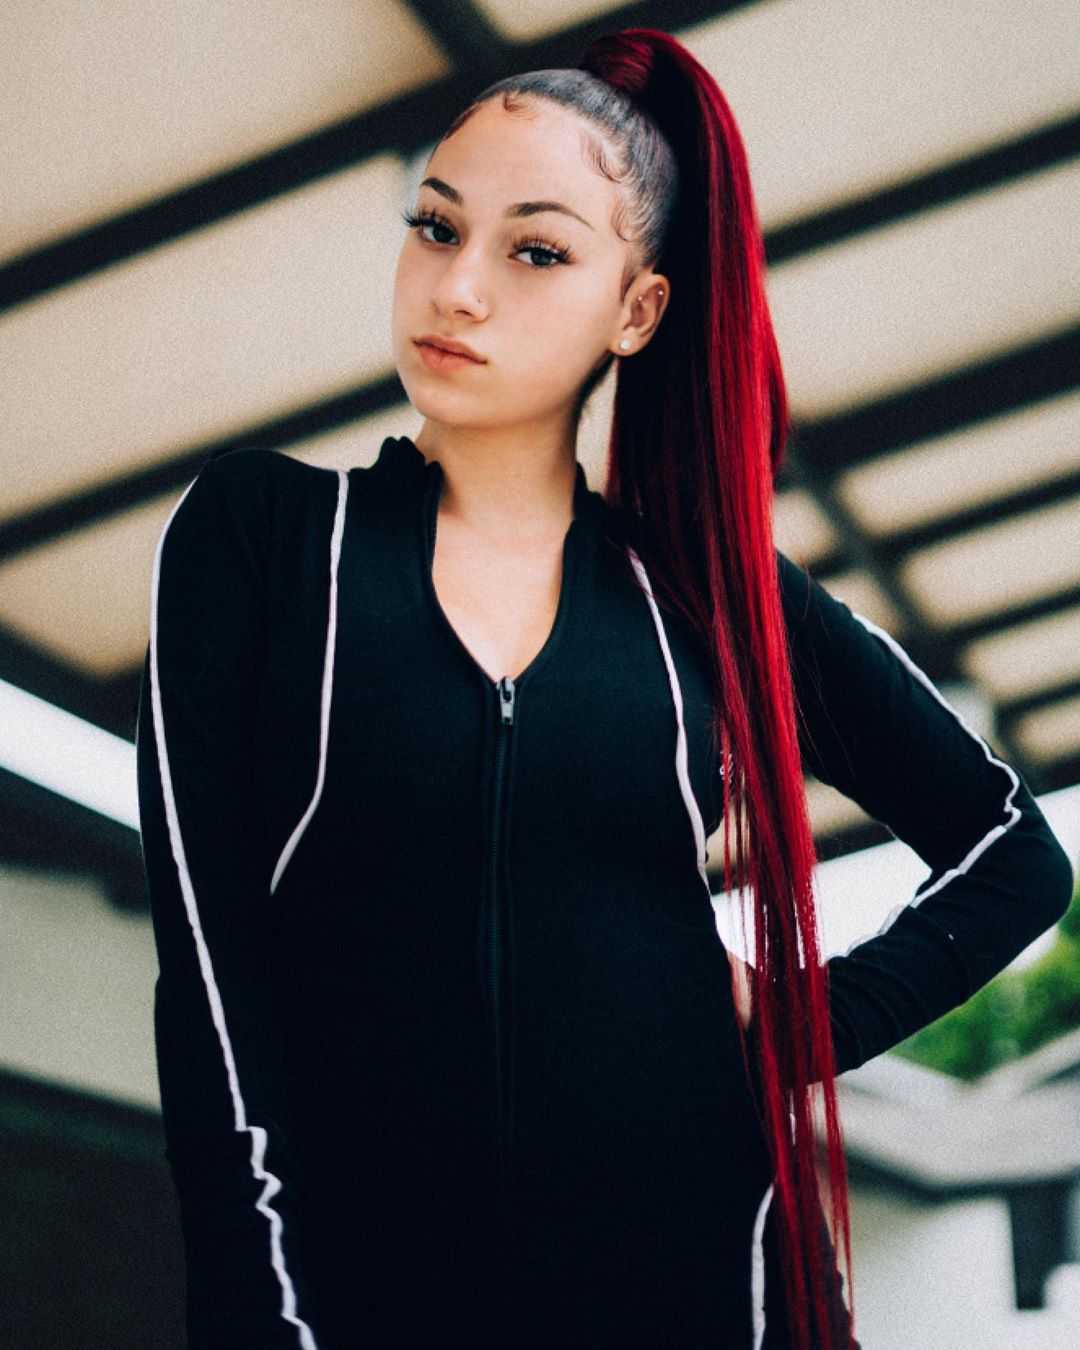 70+ Hot Pictures Of Danielle Bregoli aka Bhad Bhabie Which Will Win Your Heart 25